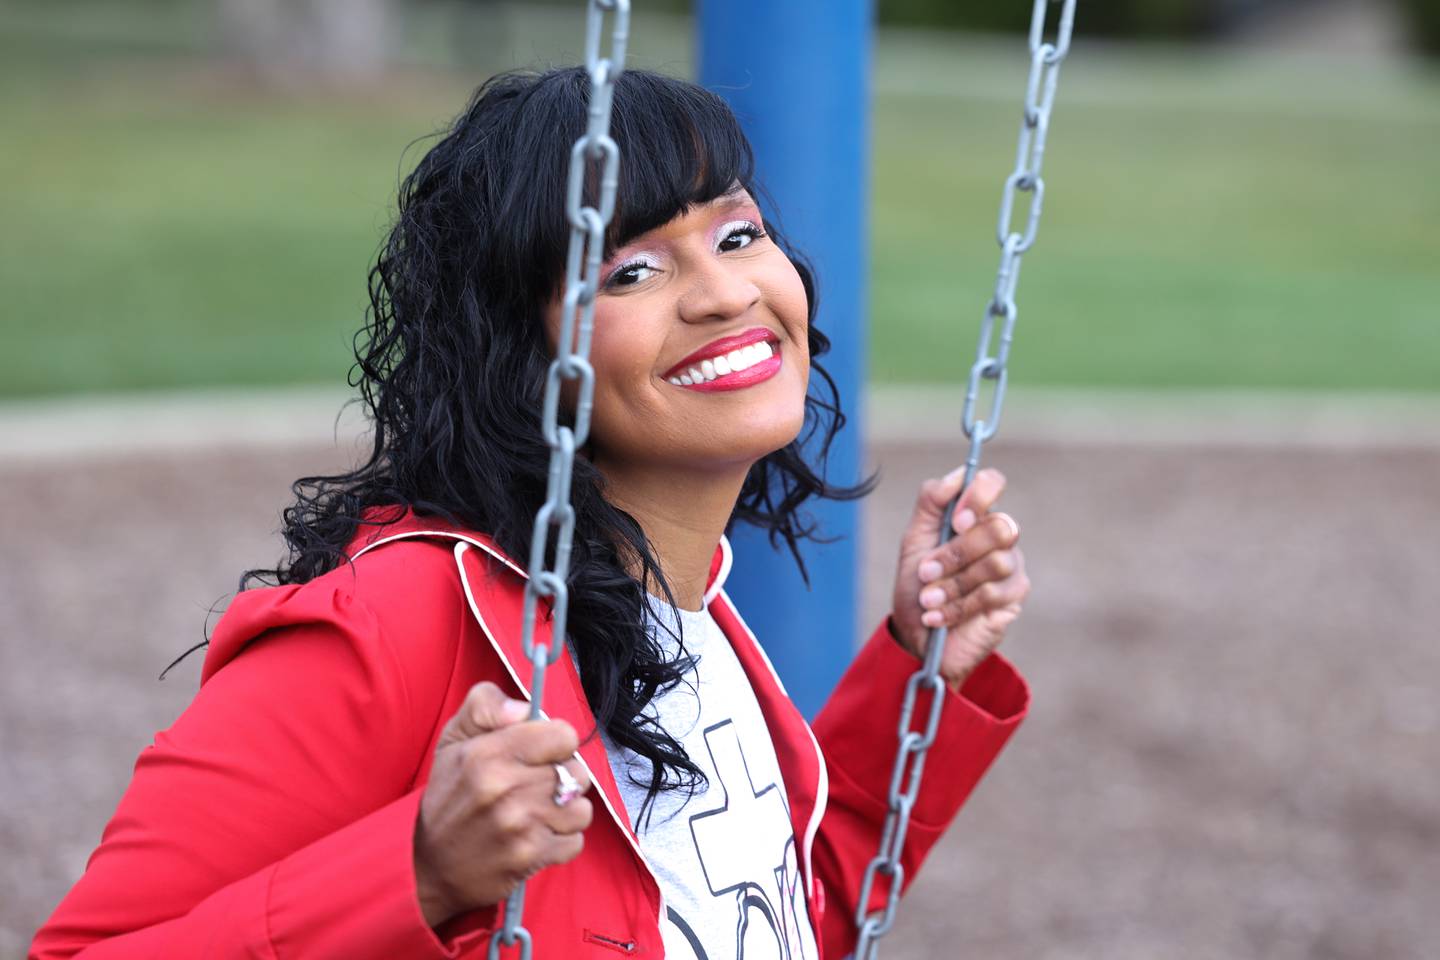 Tinley Park resident Ericka Glorious Moore is seen on Thursday, Oct. 7, 2022, in Tinley Park. Moore, a breast cancer survivor, will share her story at Silver Cross' Positively Pink: Breast Cancer Awareness Forum on Oct. 19.